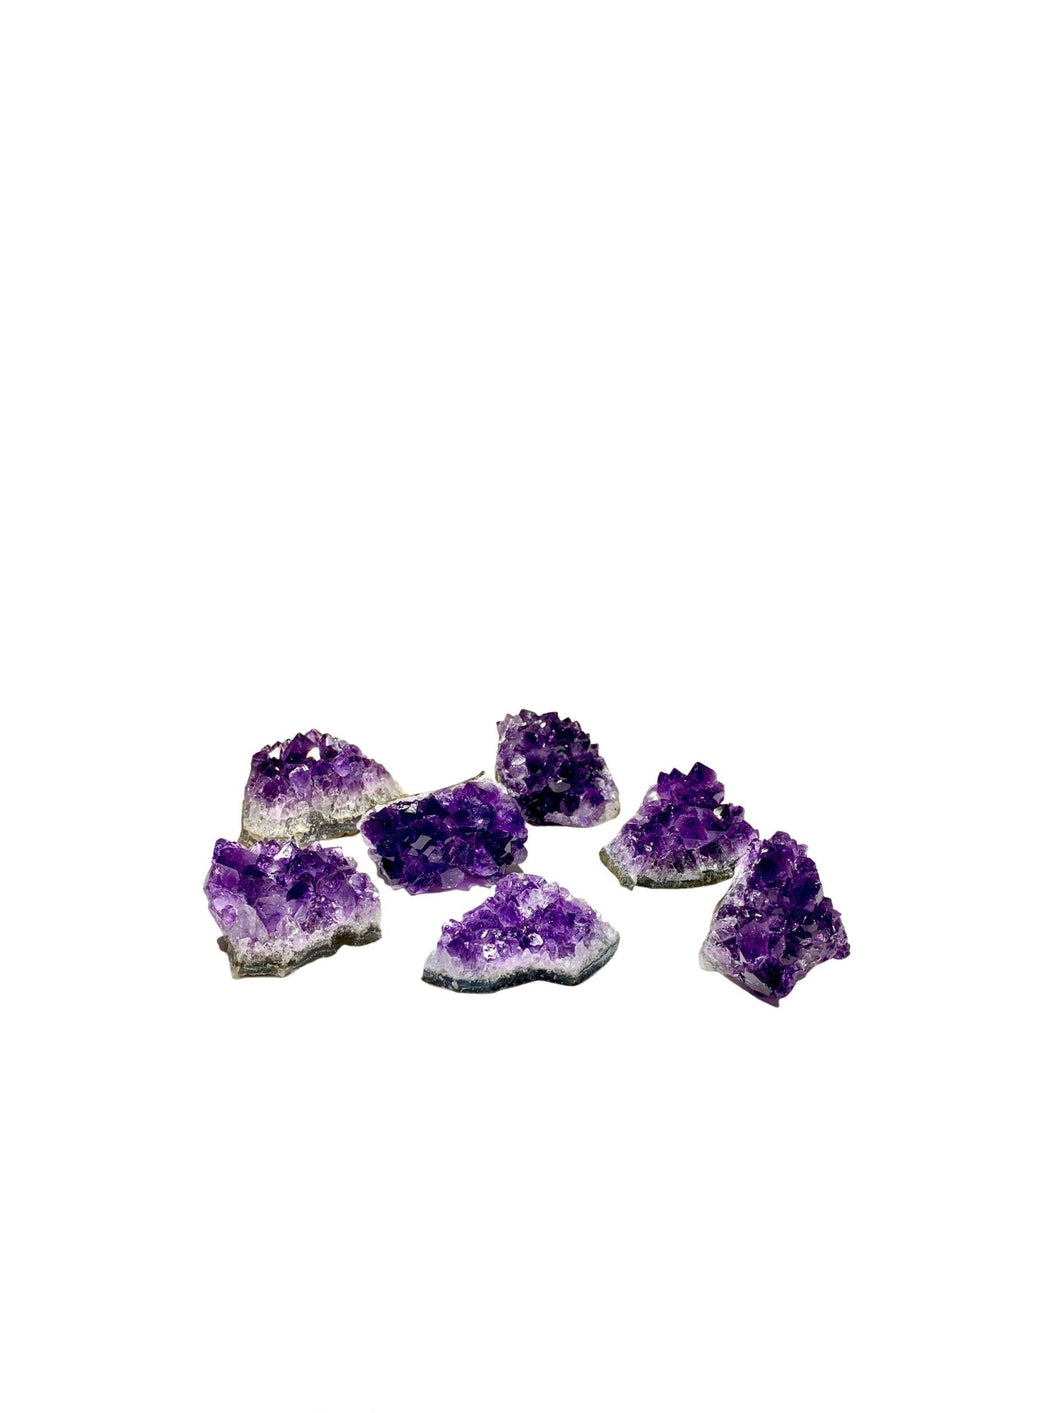 Amethyst Clusters XS